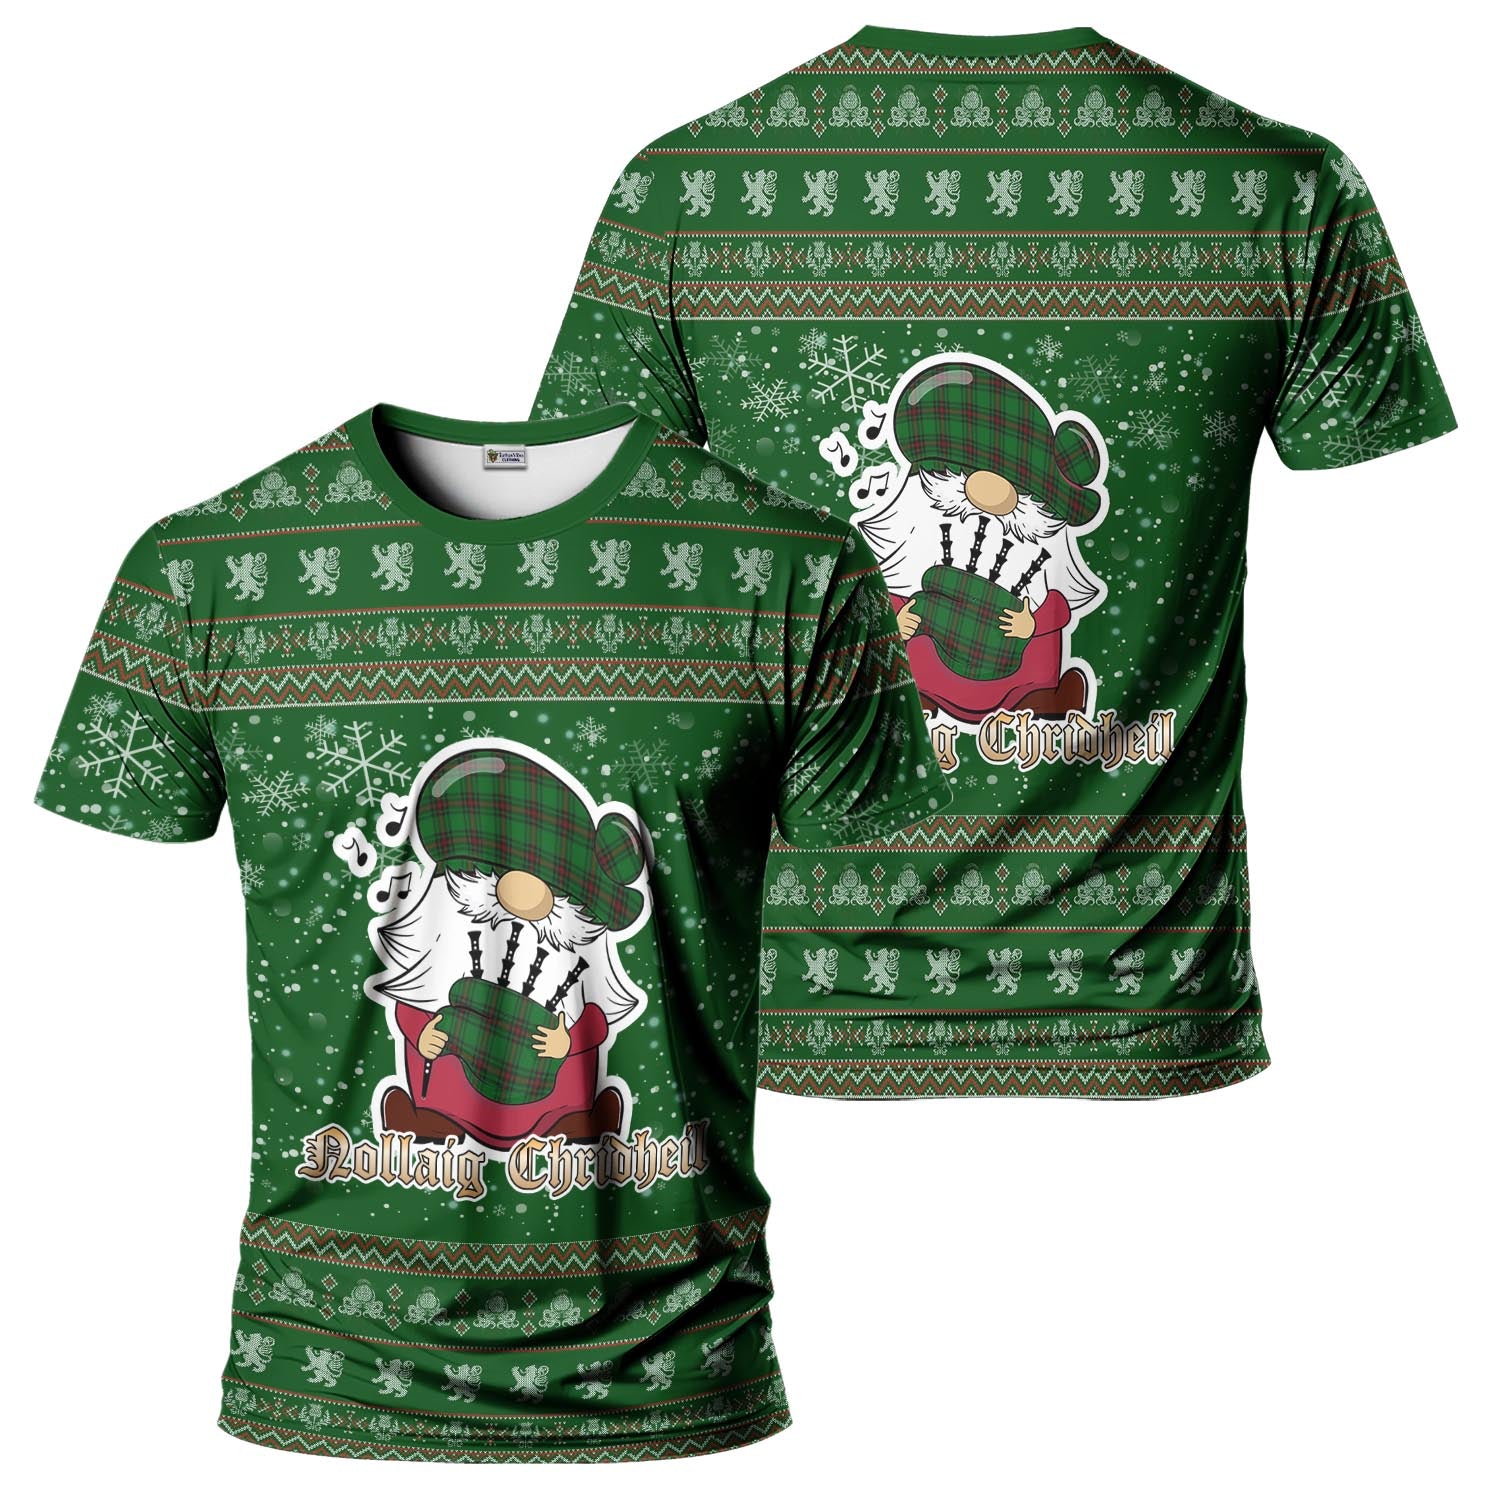 Primrose Clan Christmas Family T-Shirt with Funny Gnome Playing Bagpipes Men's Shirt Green - Tartanvibesclothing